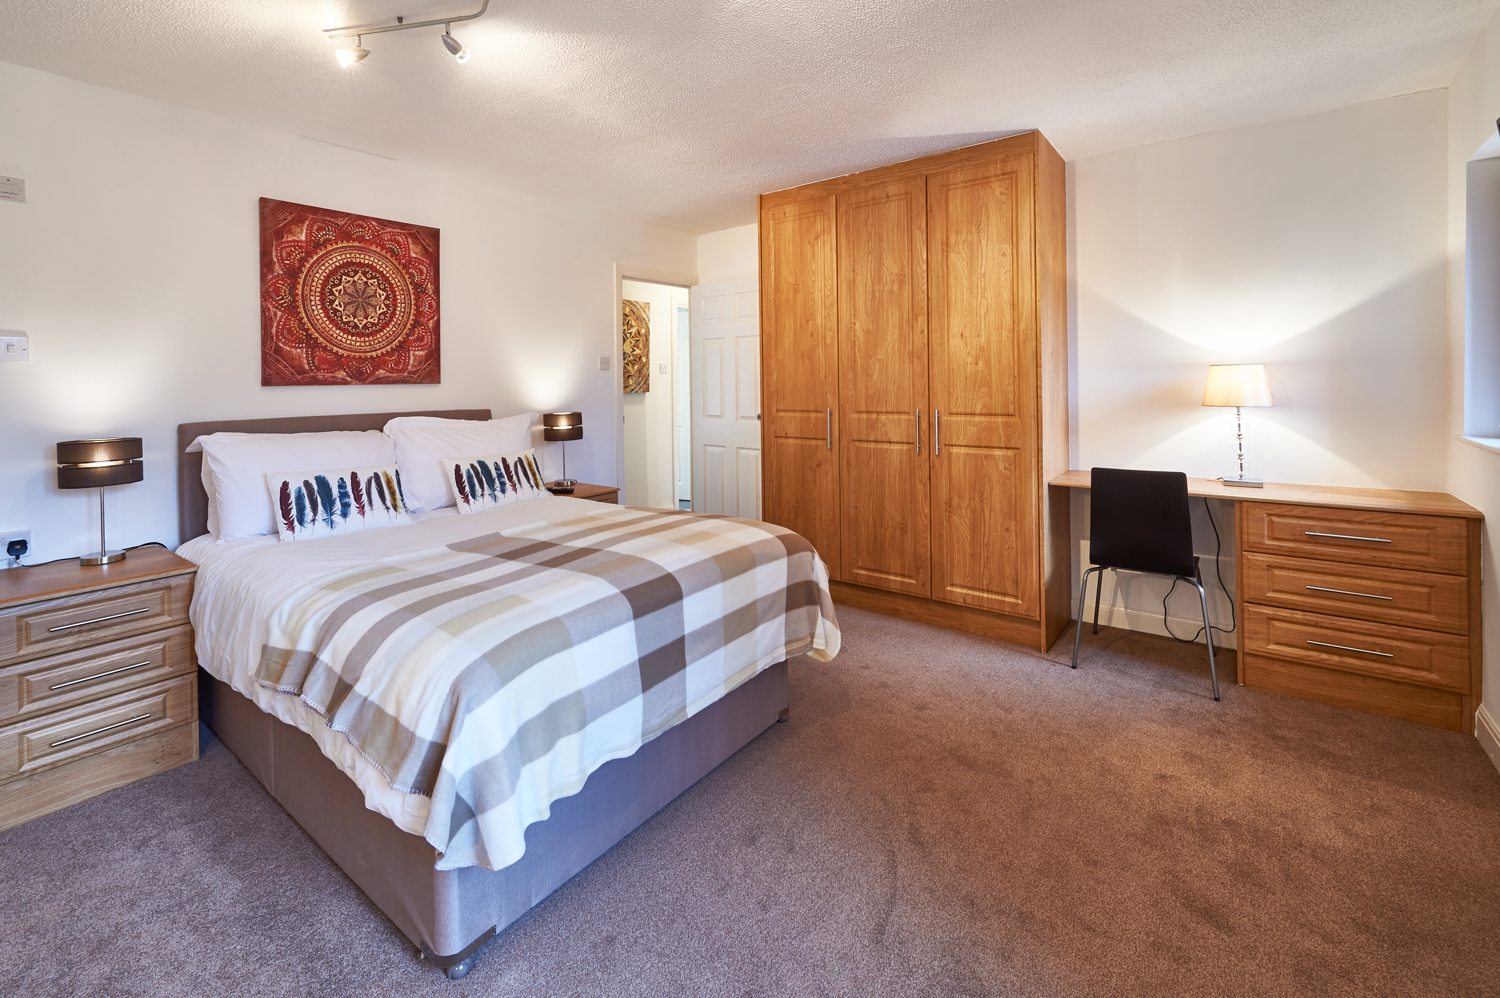 Northleigh Serviced Accommodation Milton Keynes - Fully Equipped Kitchen, Modern Design, Cheap Prices, Close To Train Station - Book Urban Stay Corporate Serviced Apartments today!!